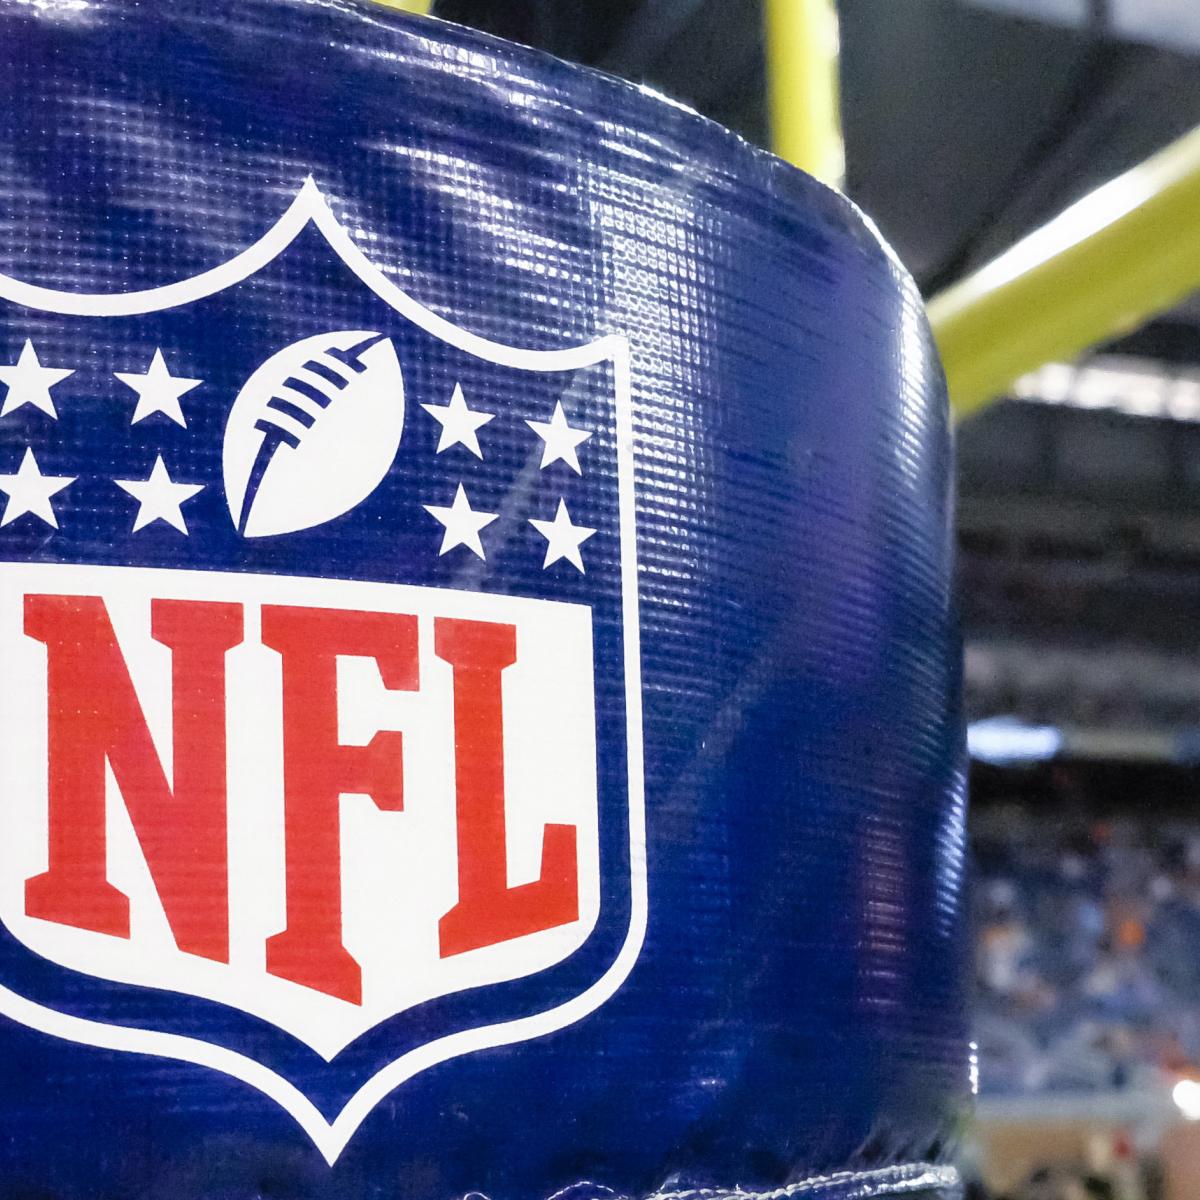 Report: NFLPA Says 12 Rookies Tested Positive for COVID-19 in Initial Screening - Bleacher Report